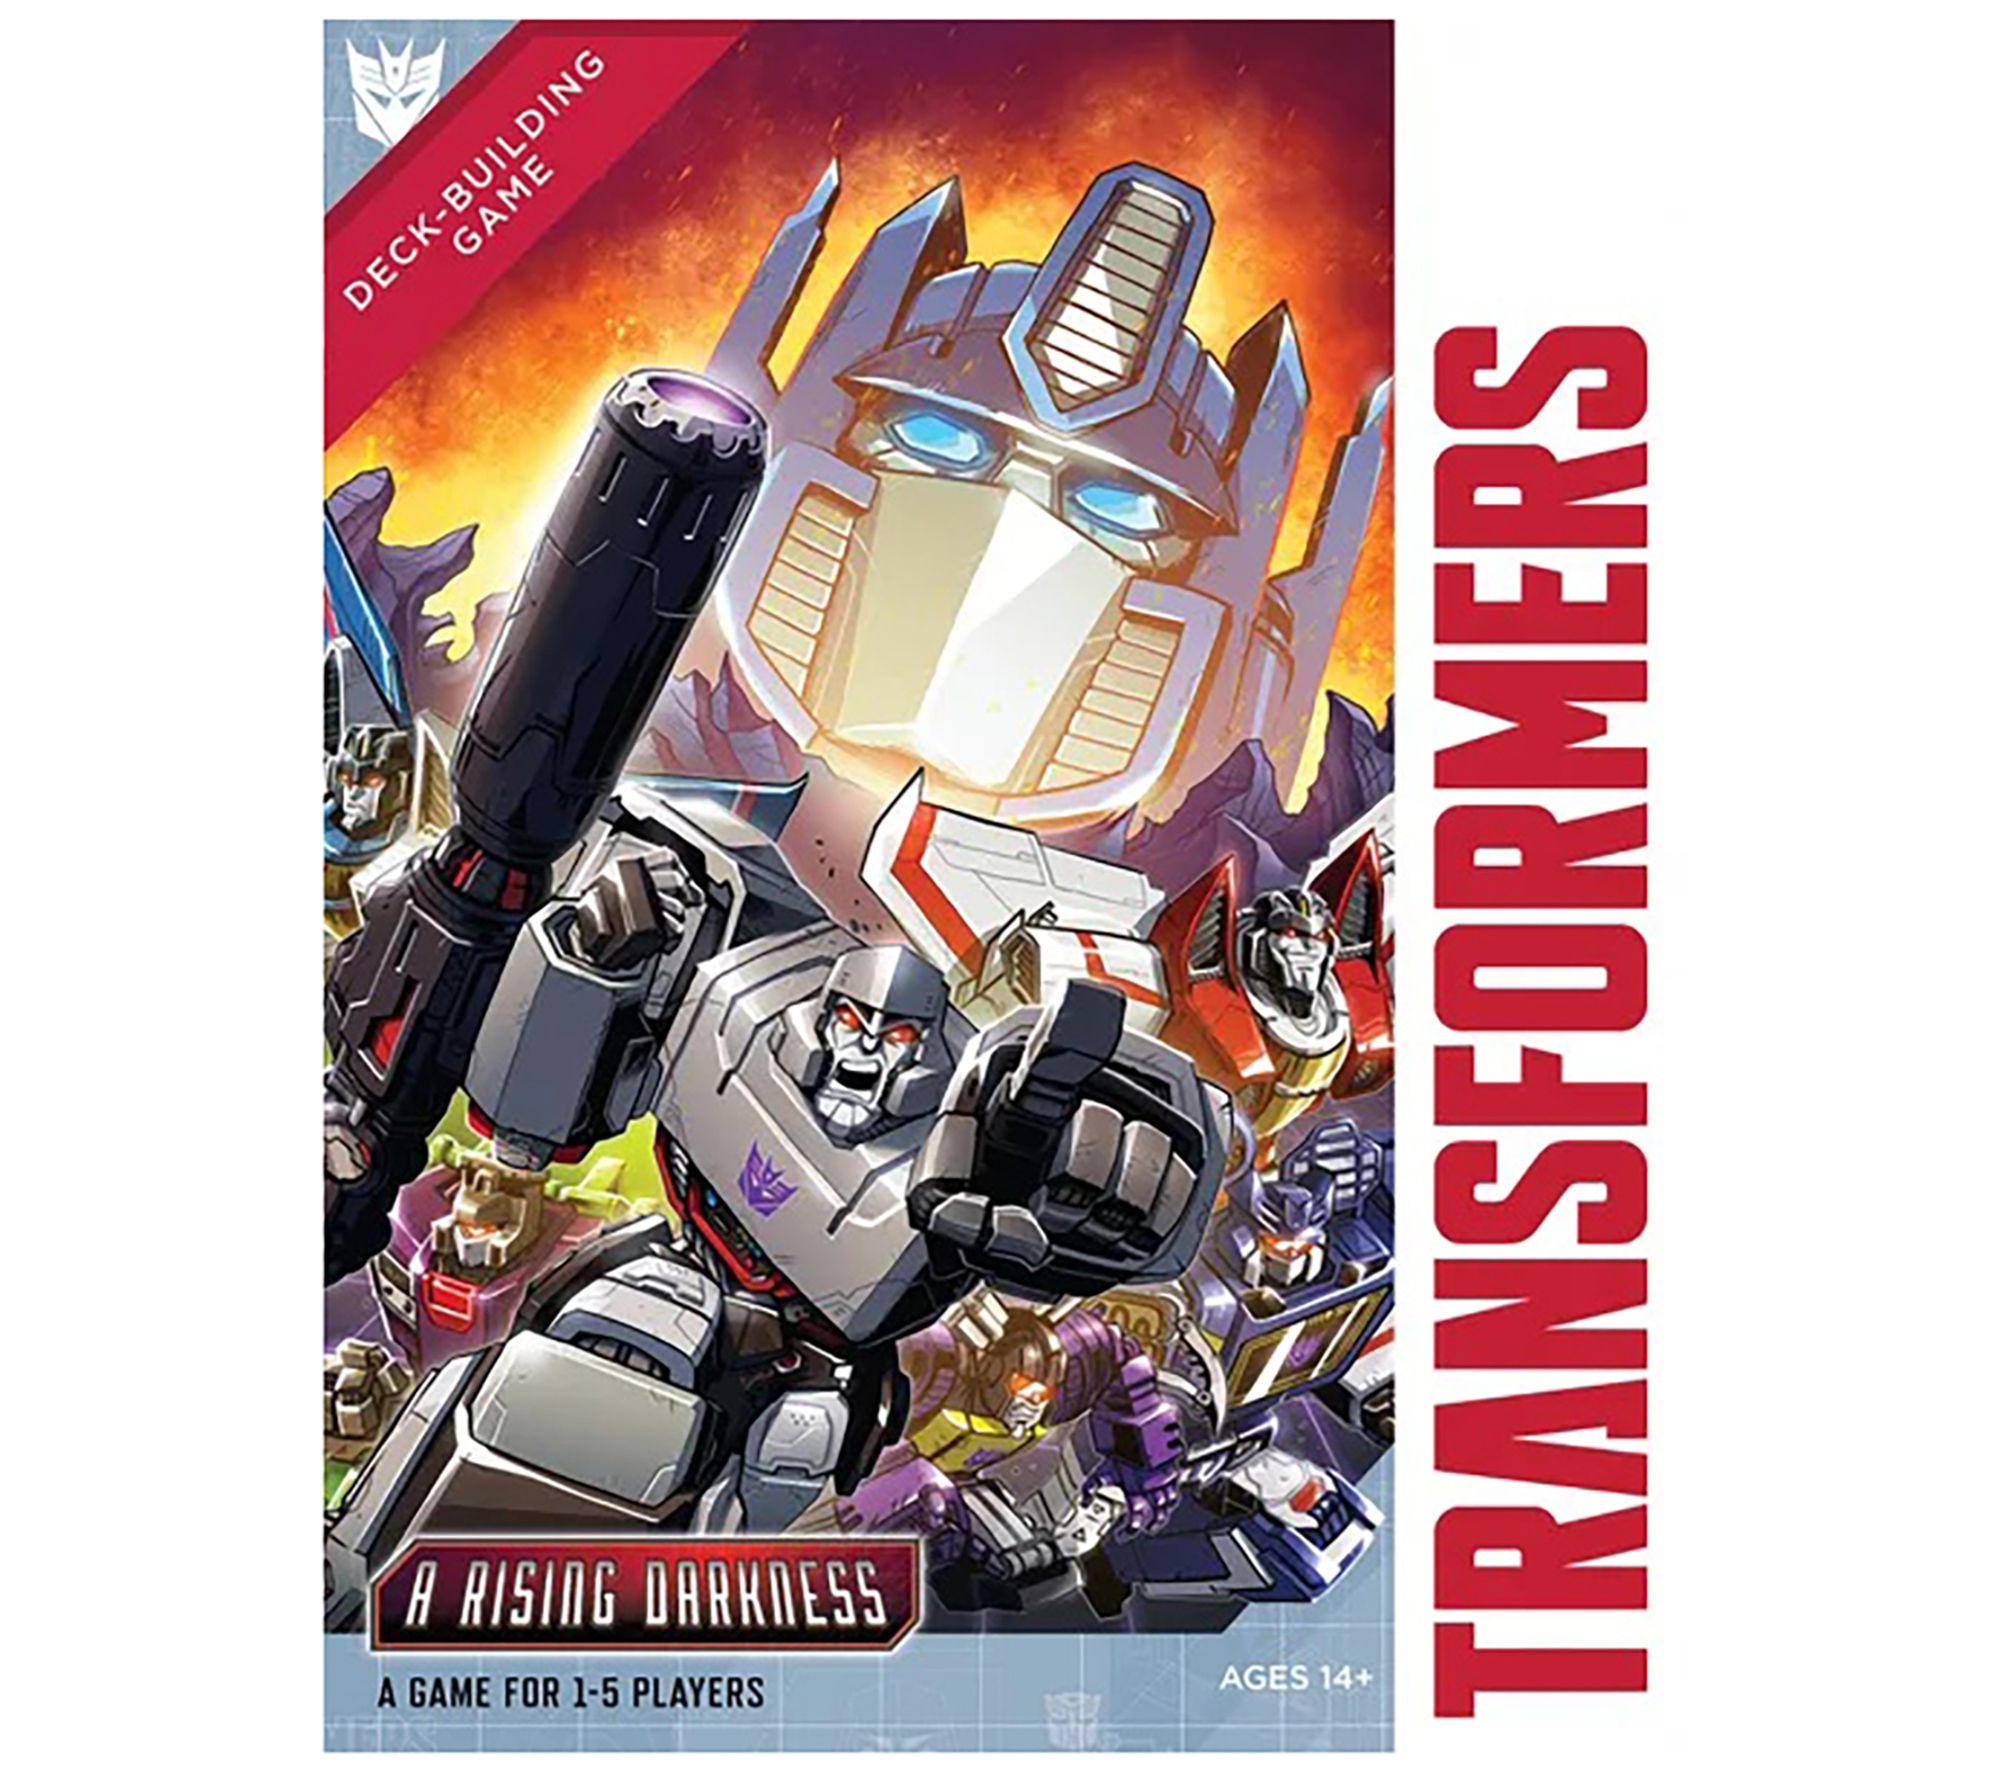 Transformers  More than Meets the Eye Stainless Steel Water